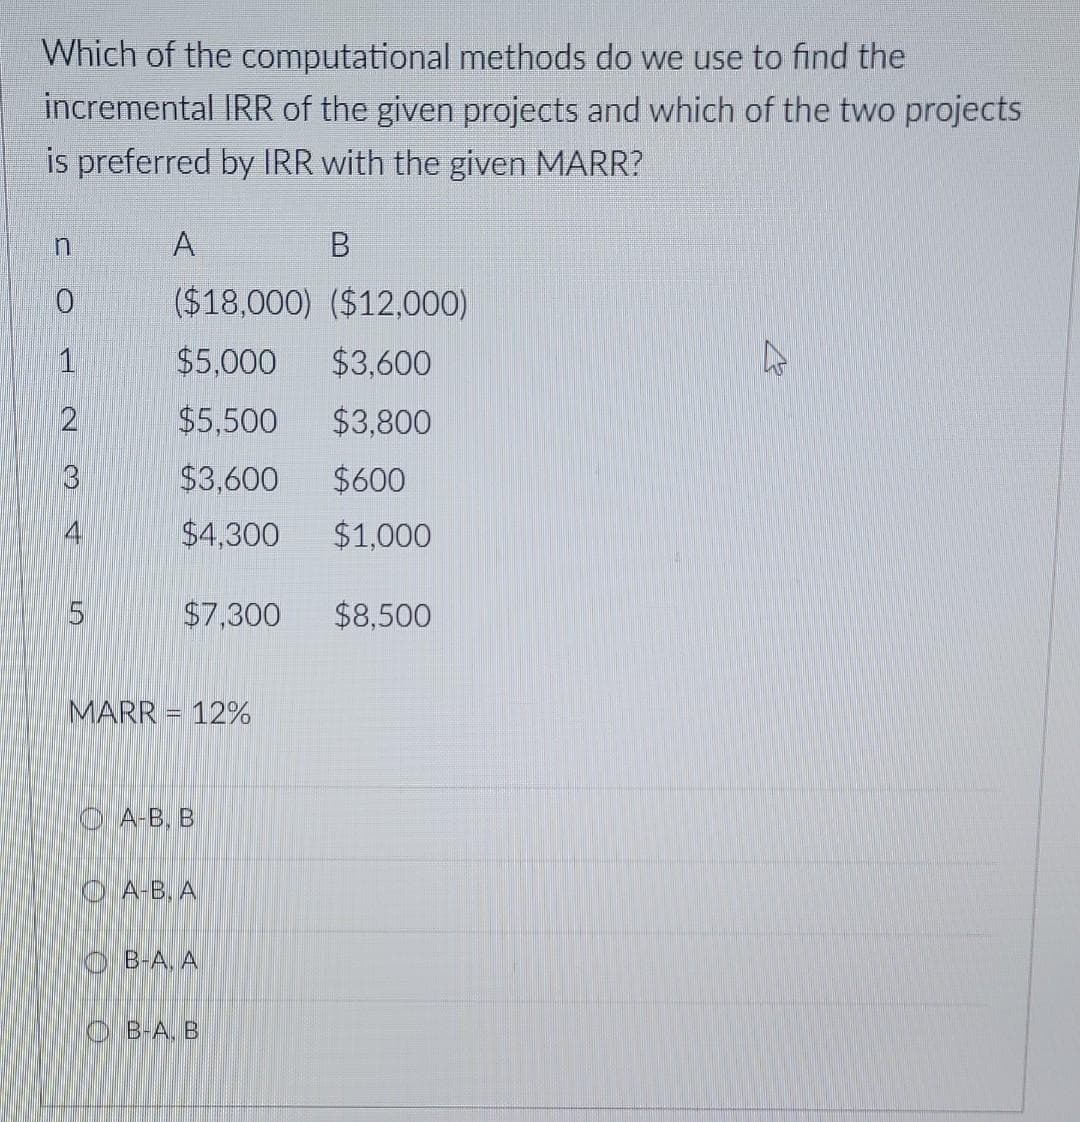 Which of the computational methods do we use to find the
incremental IRR of the given projects and which of the two projects
is preferred by IRR with the given MARR?
n
A
B
0
($18,000) ($12,000)
1
$5,000 $3,600
2
$5,500 $3,800
3
$3,600 $600
$4,300
$7,300
5
MARR = 12%
A-B. B
A-B, A
B-A, A
O B-A, B
$1,000
$8,500
B